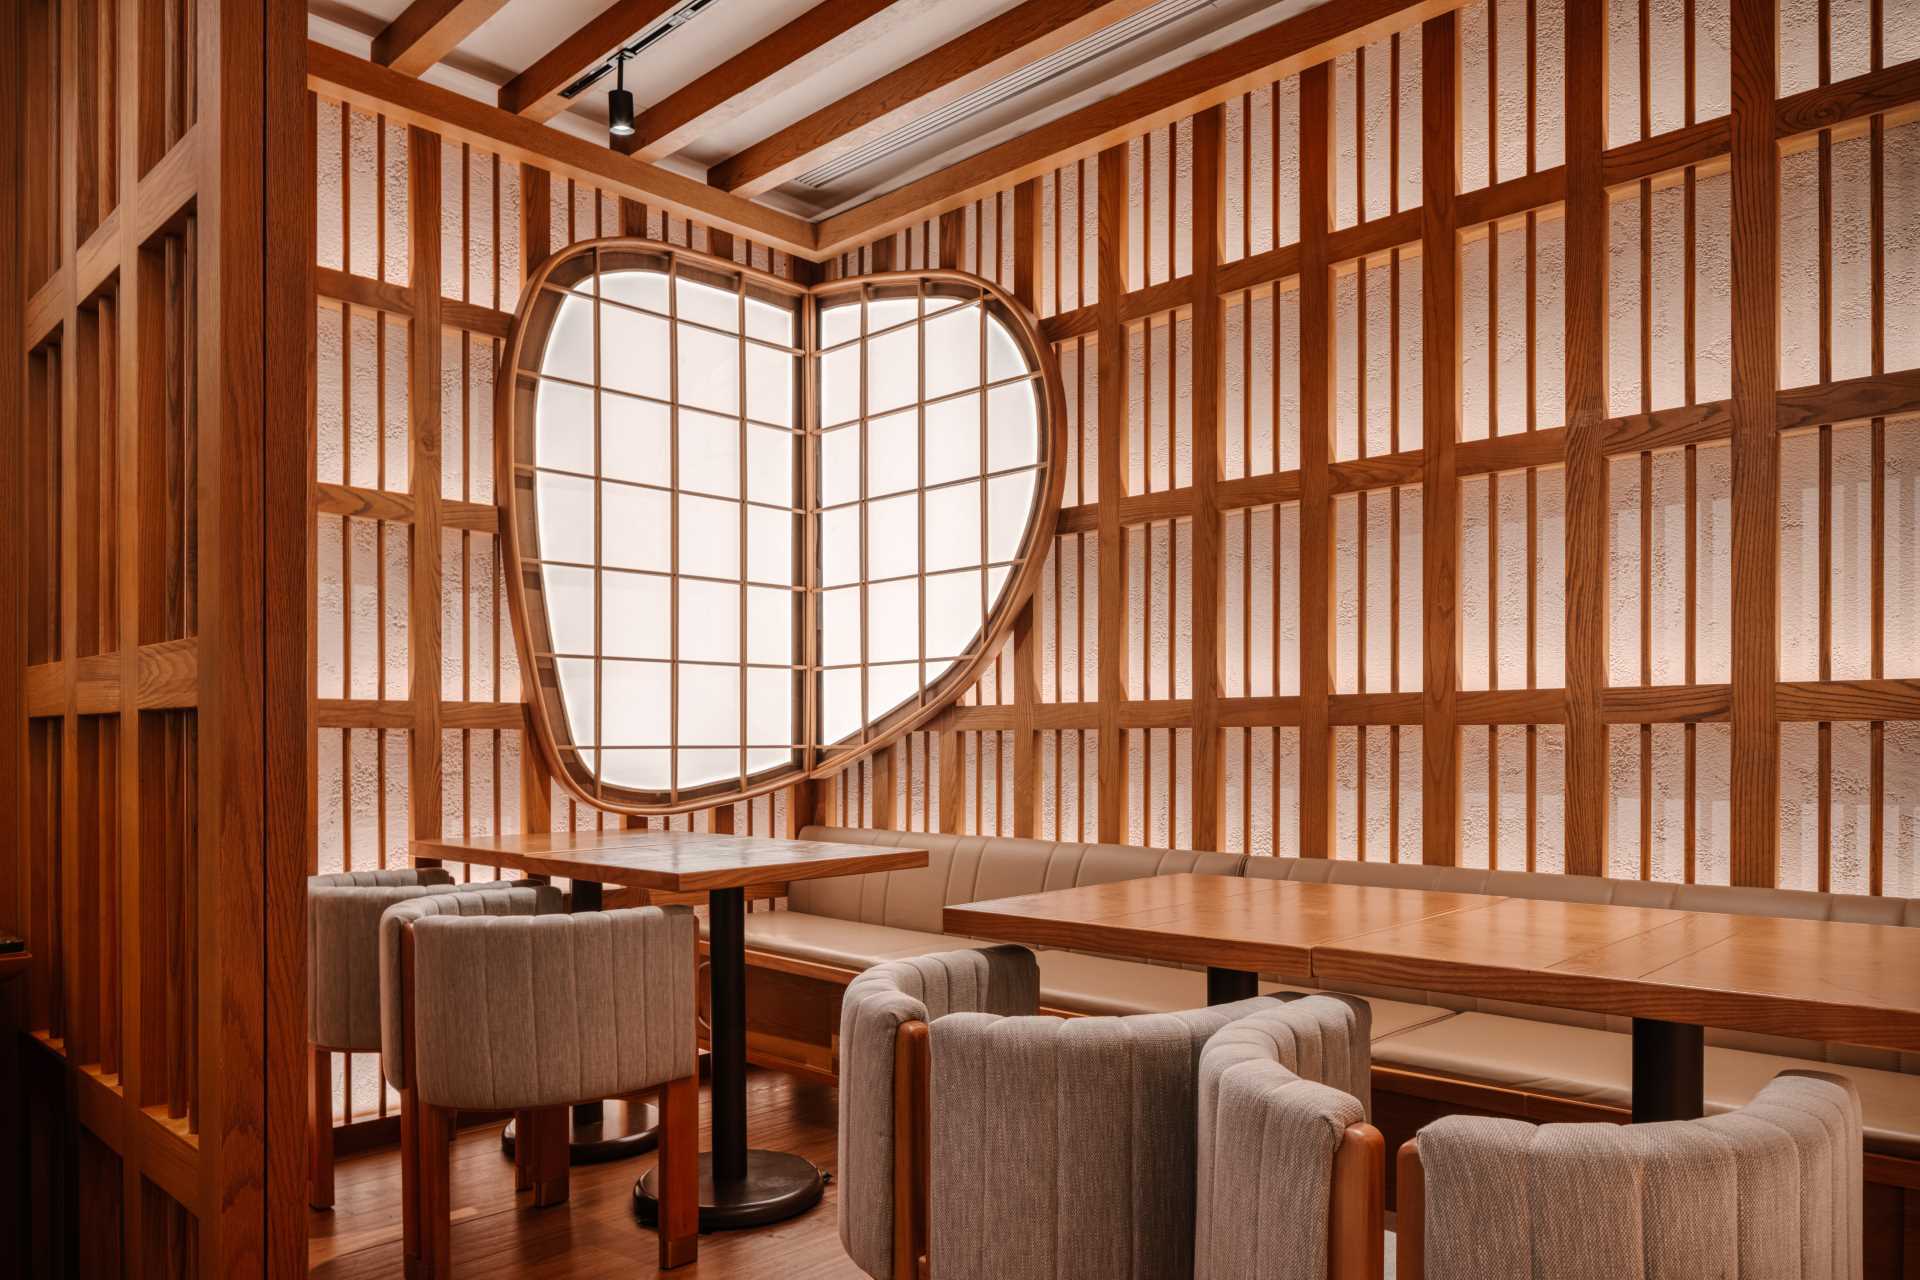 A private VIP dining room is decorated with an oval shoji window balancing the linear design of the wood accented walls.